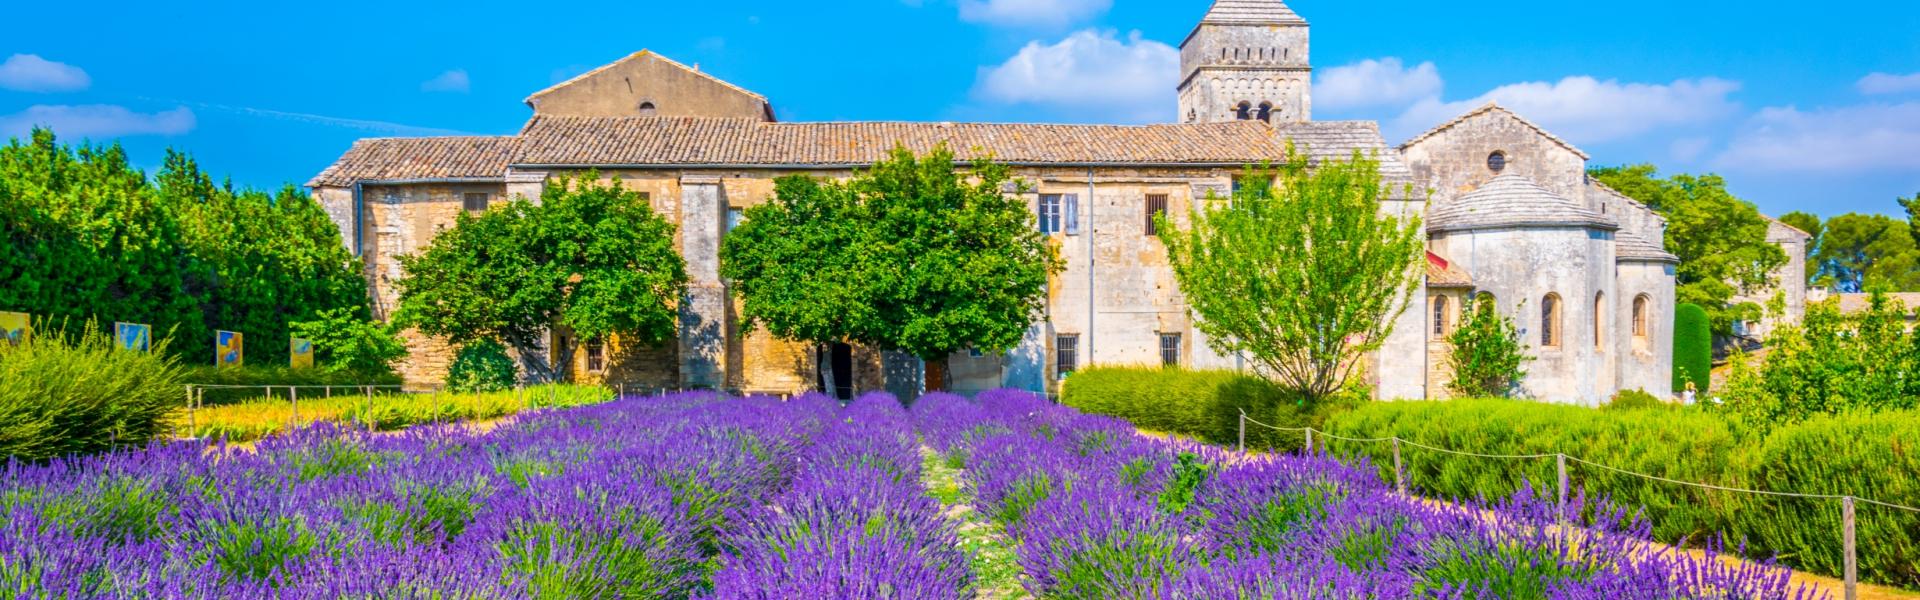 Find the perfect vacation home in Saint-Rémy-de-Provence - Casamundo